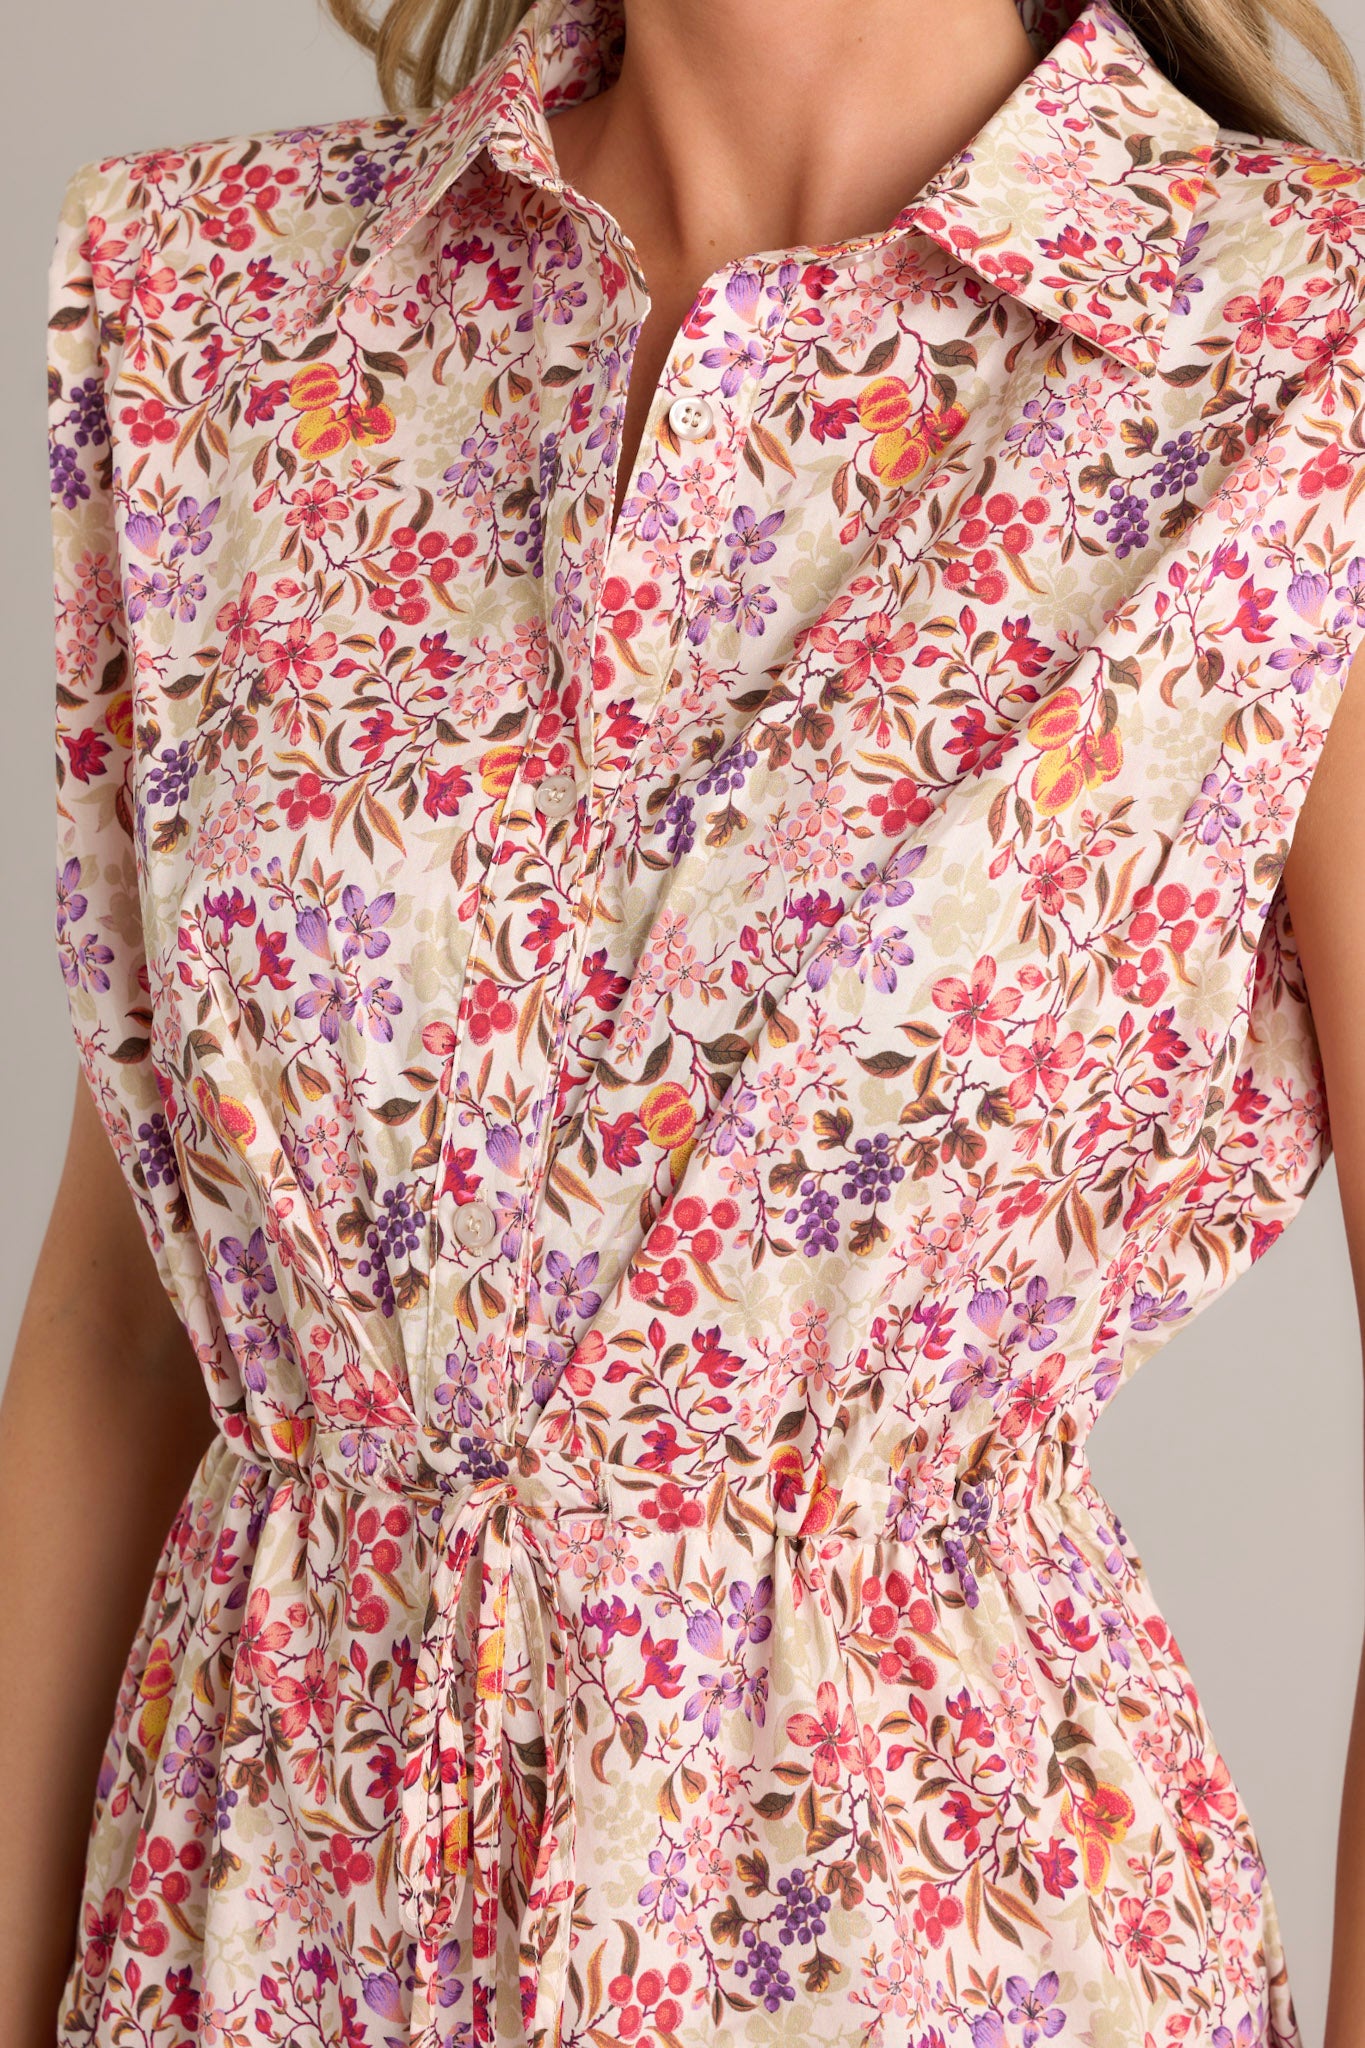 Close-up of the beige floral multi mini dress fabric highlighting the delicate floral print and the textured material.